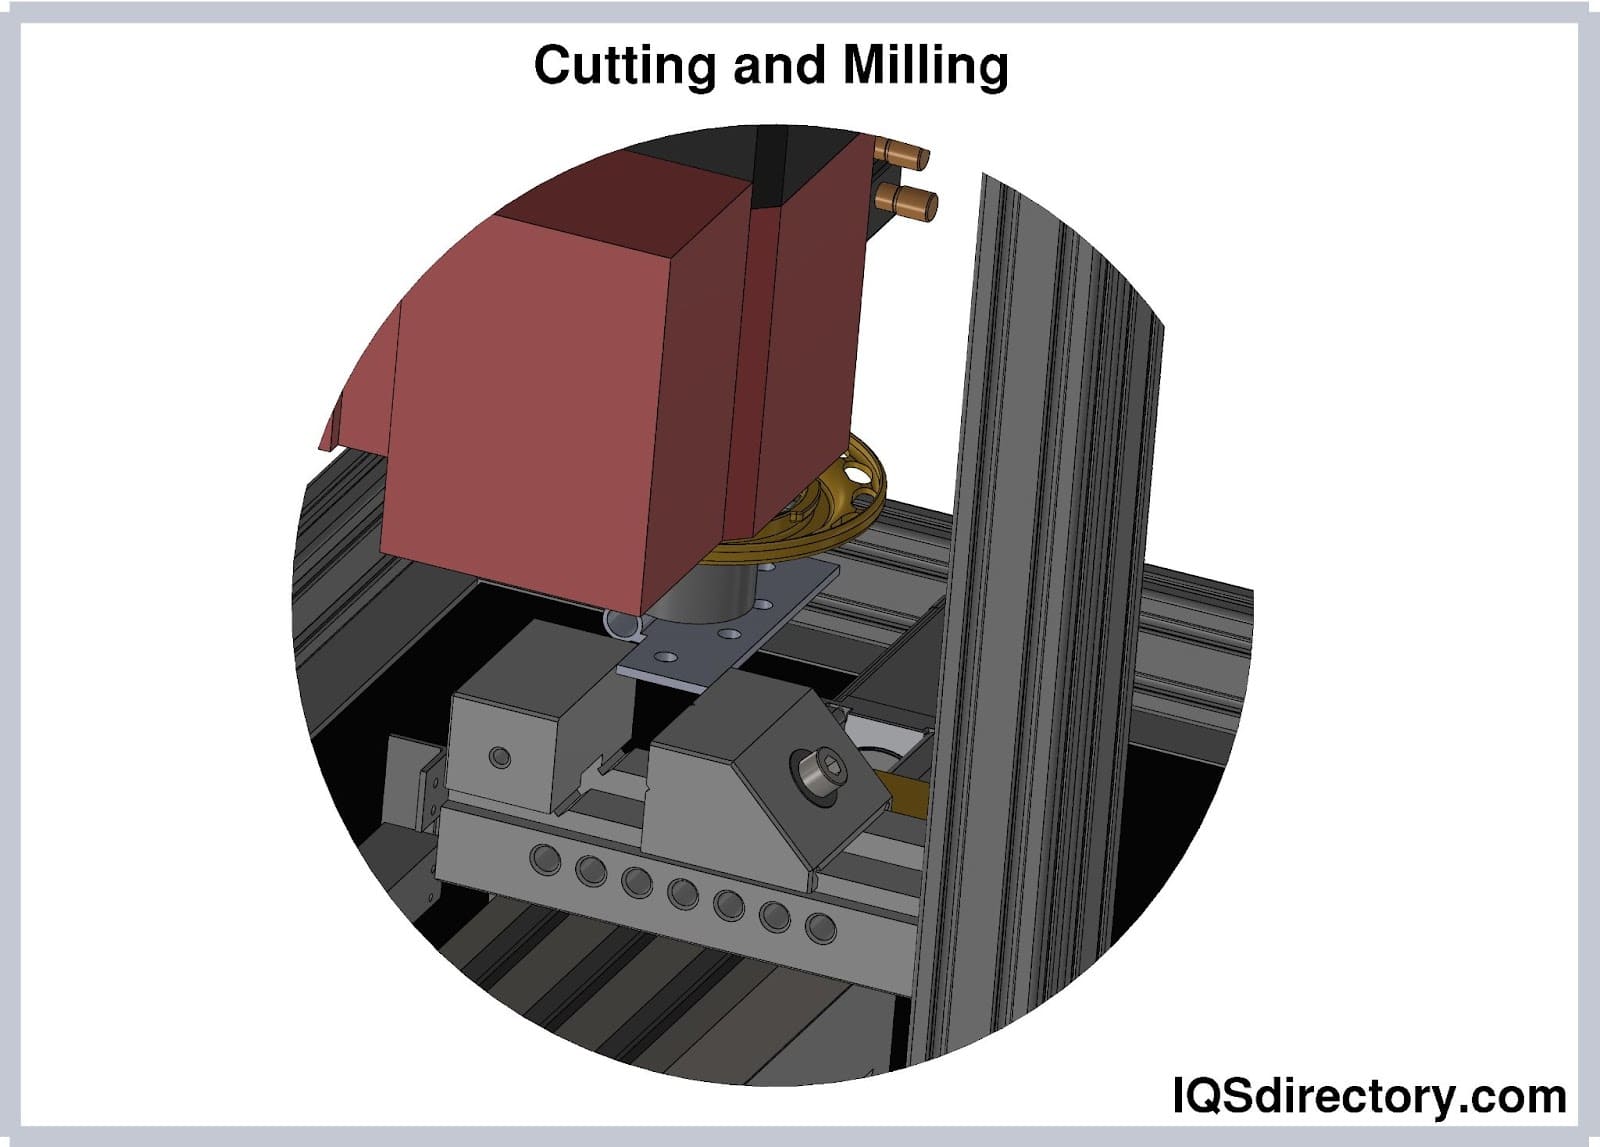 Cutting and Milling